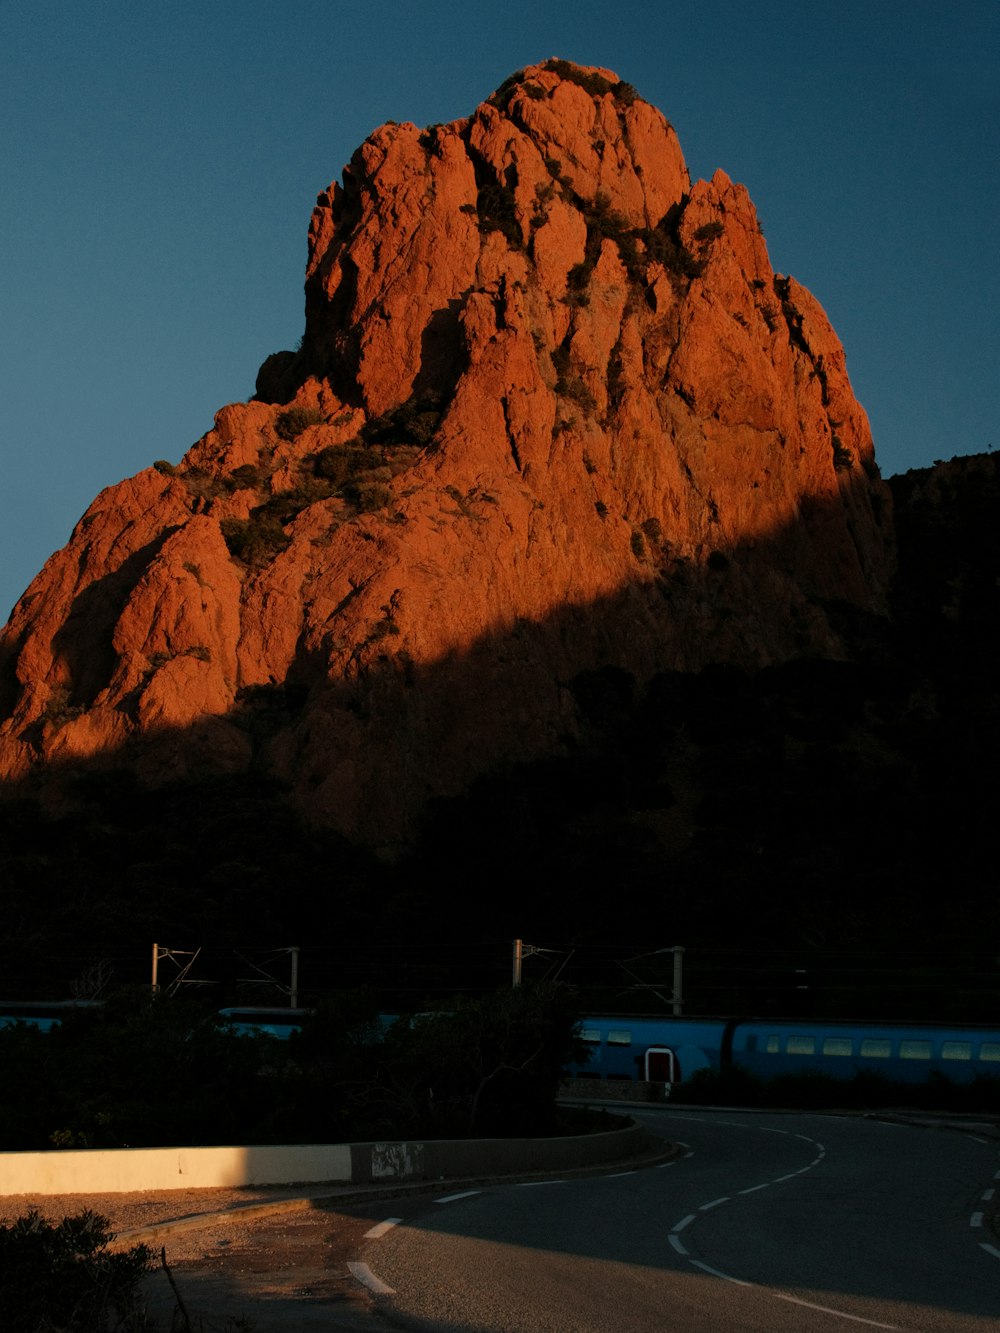 the sun is setting on a mountain with a train passing by